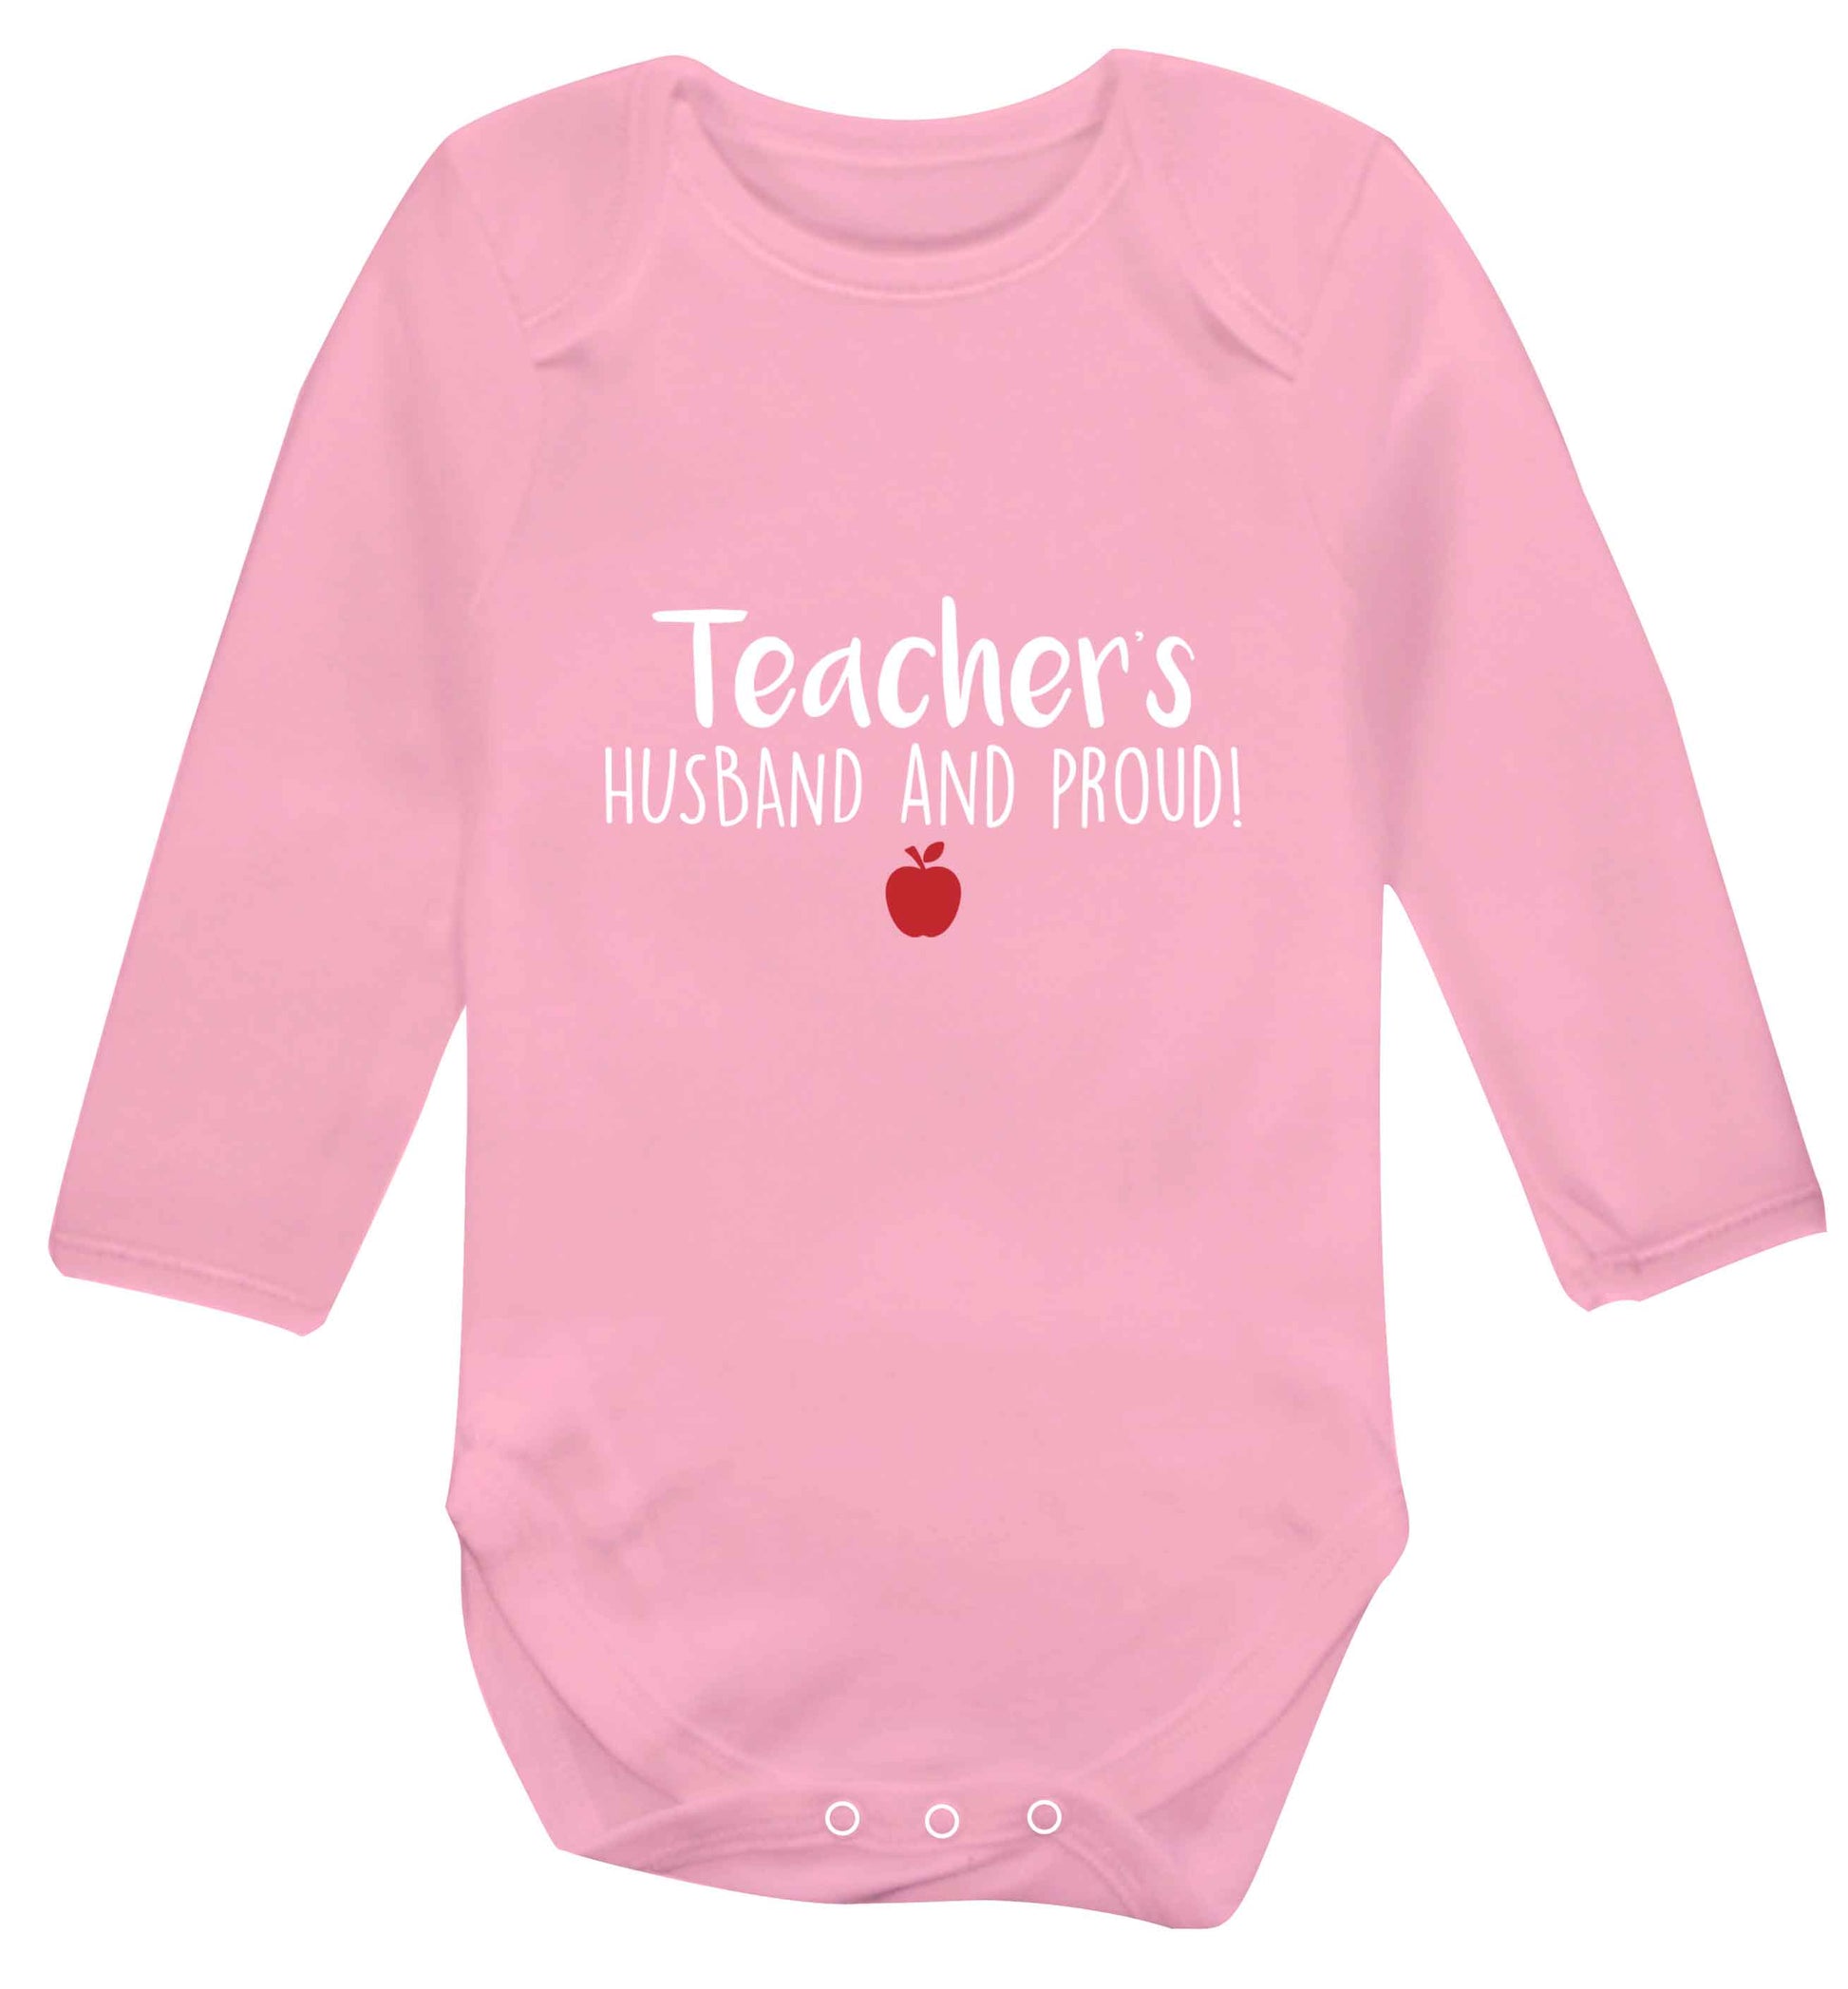 Teachers husband and proud baby vest long sleeved pale pink 6-12 months